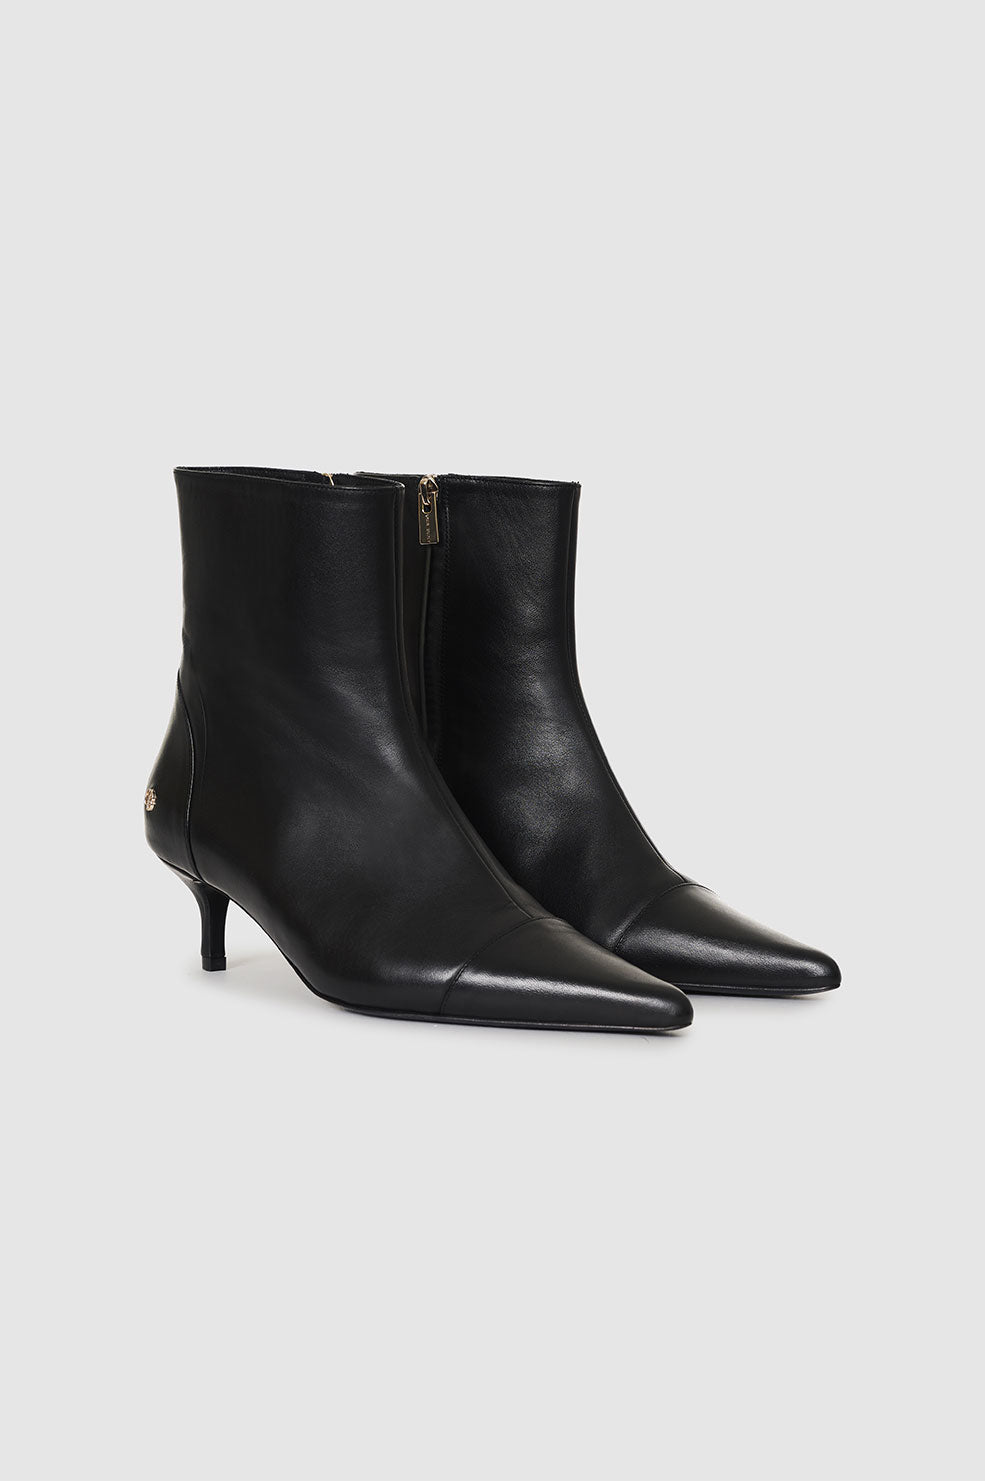 ANINE BING Willa Boots - Black - Side Pair View